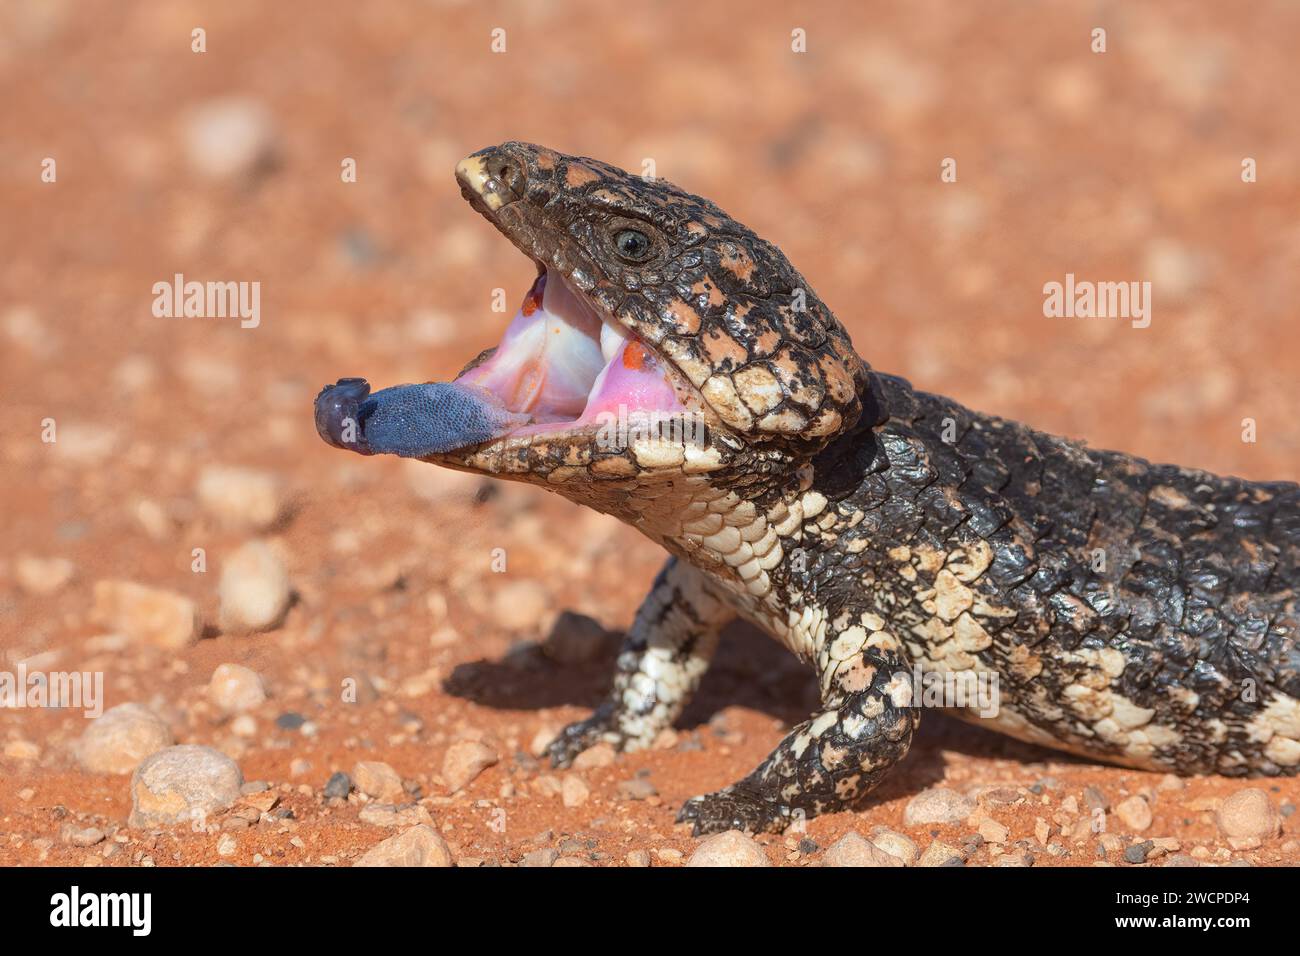 A Shingleback (Tiliqua rugosa)  in a threat posture with open mouth and blue tongue out, Nullarbor, Western Australia, WA, Australia Stock Photo